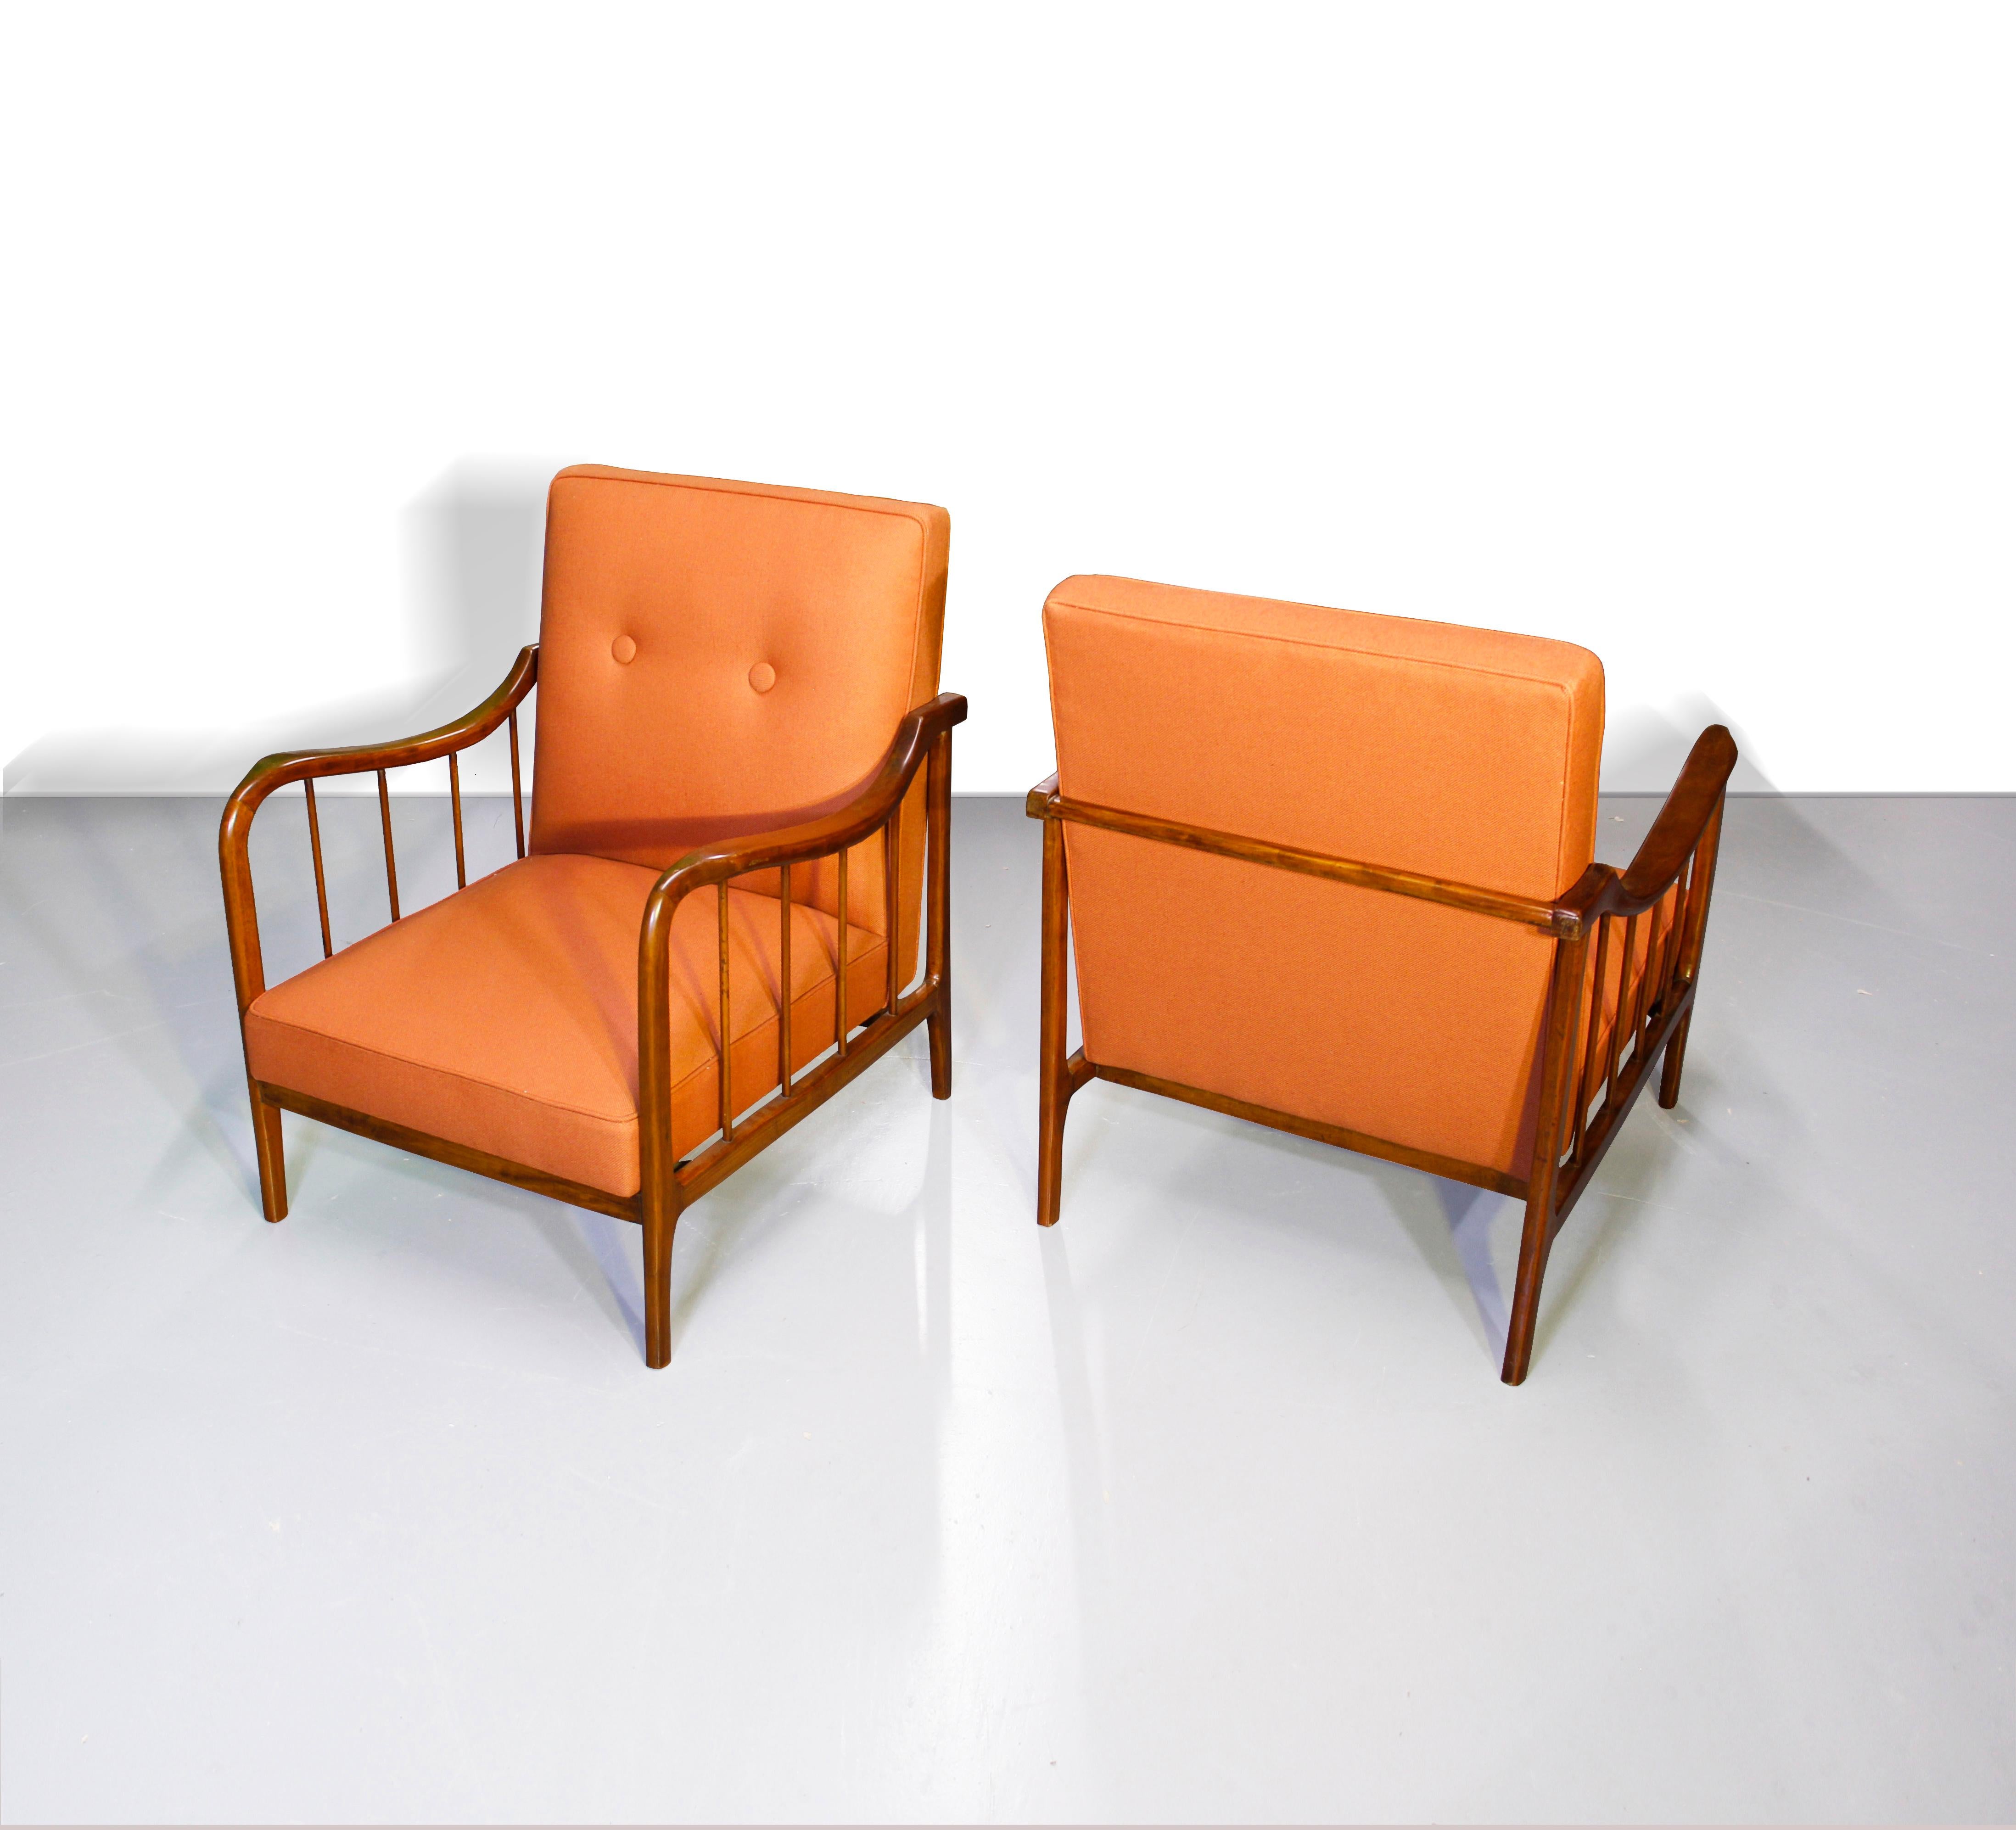 A pair of armchairs made of Caviúna. 
Designed by Rino Levi, Brazil, 1950s

The grain & colour of the wood, plus the impeccable woodwork alone, make these quite impressive armchairs
The sculpted and curvaceous lines of the armrests are beautifully